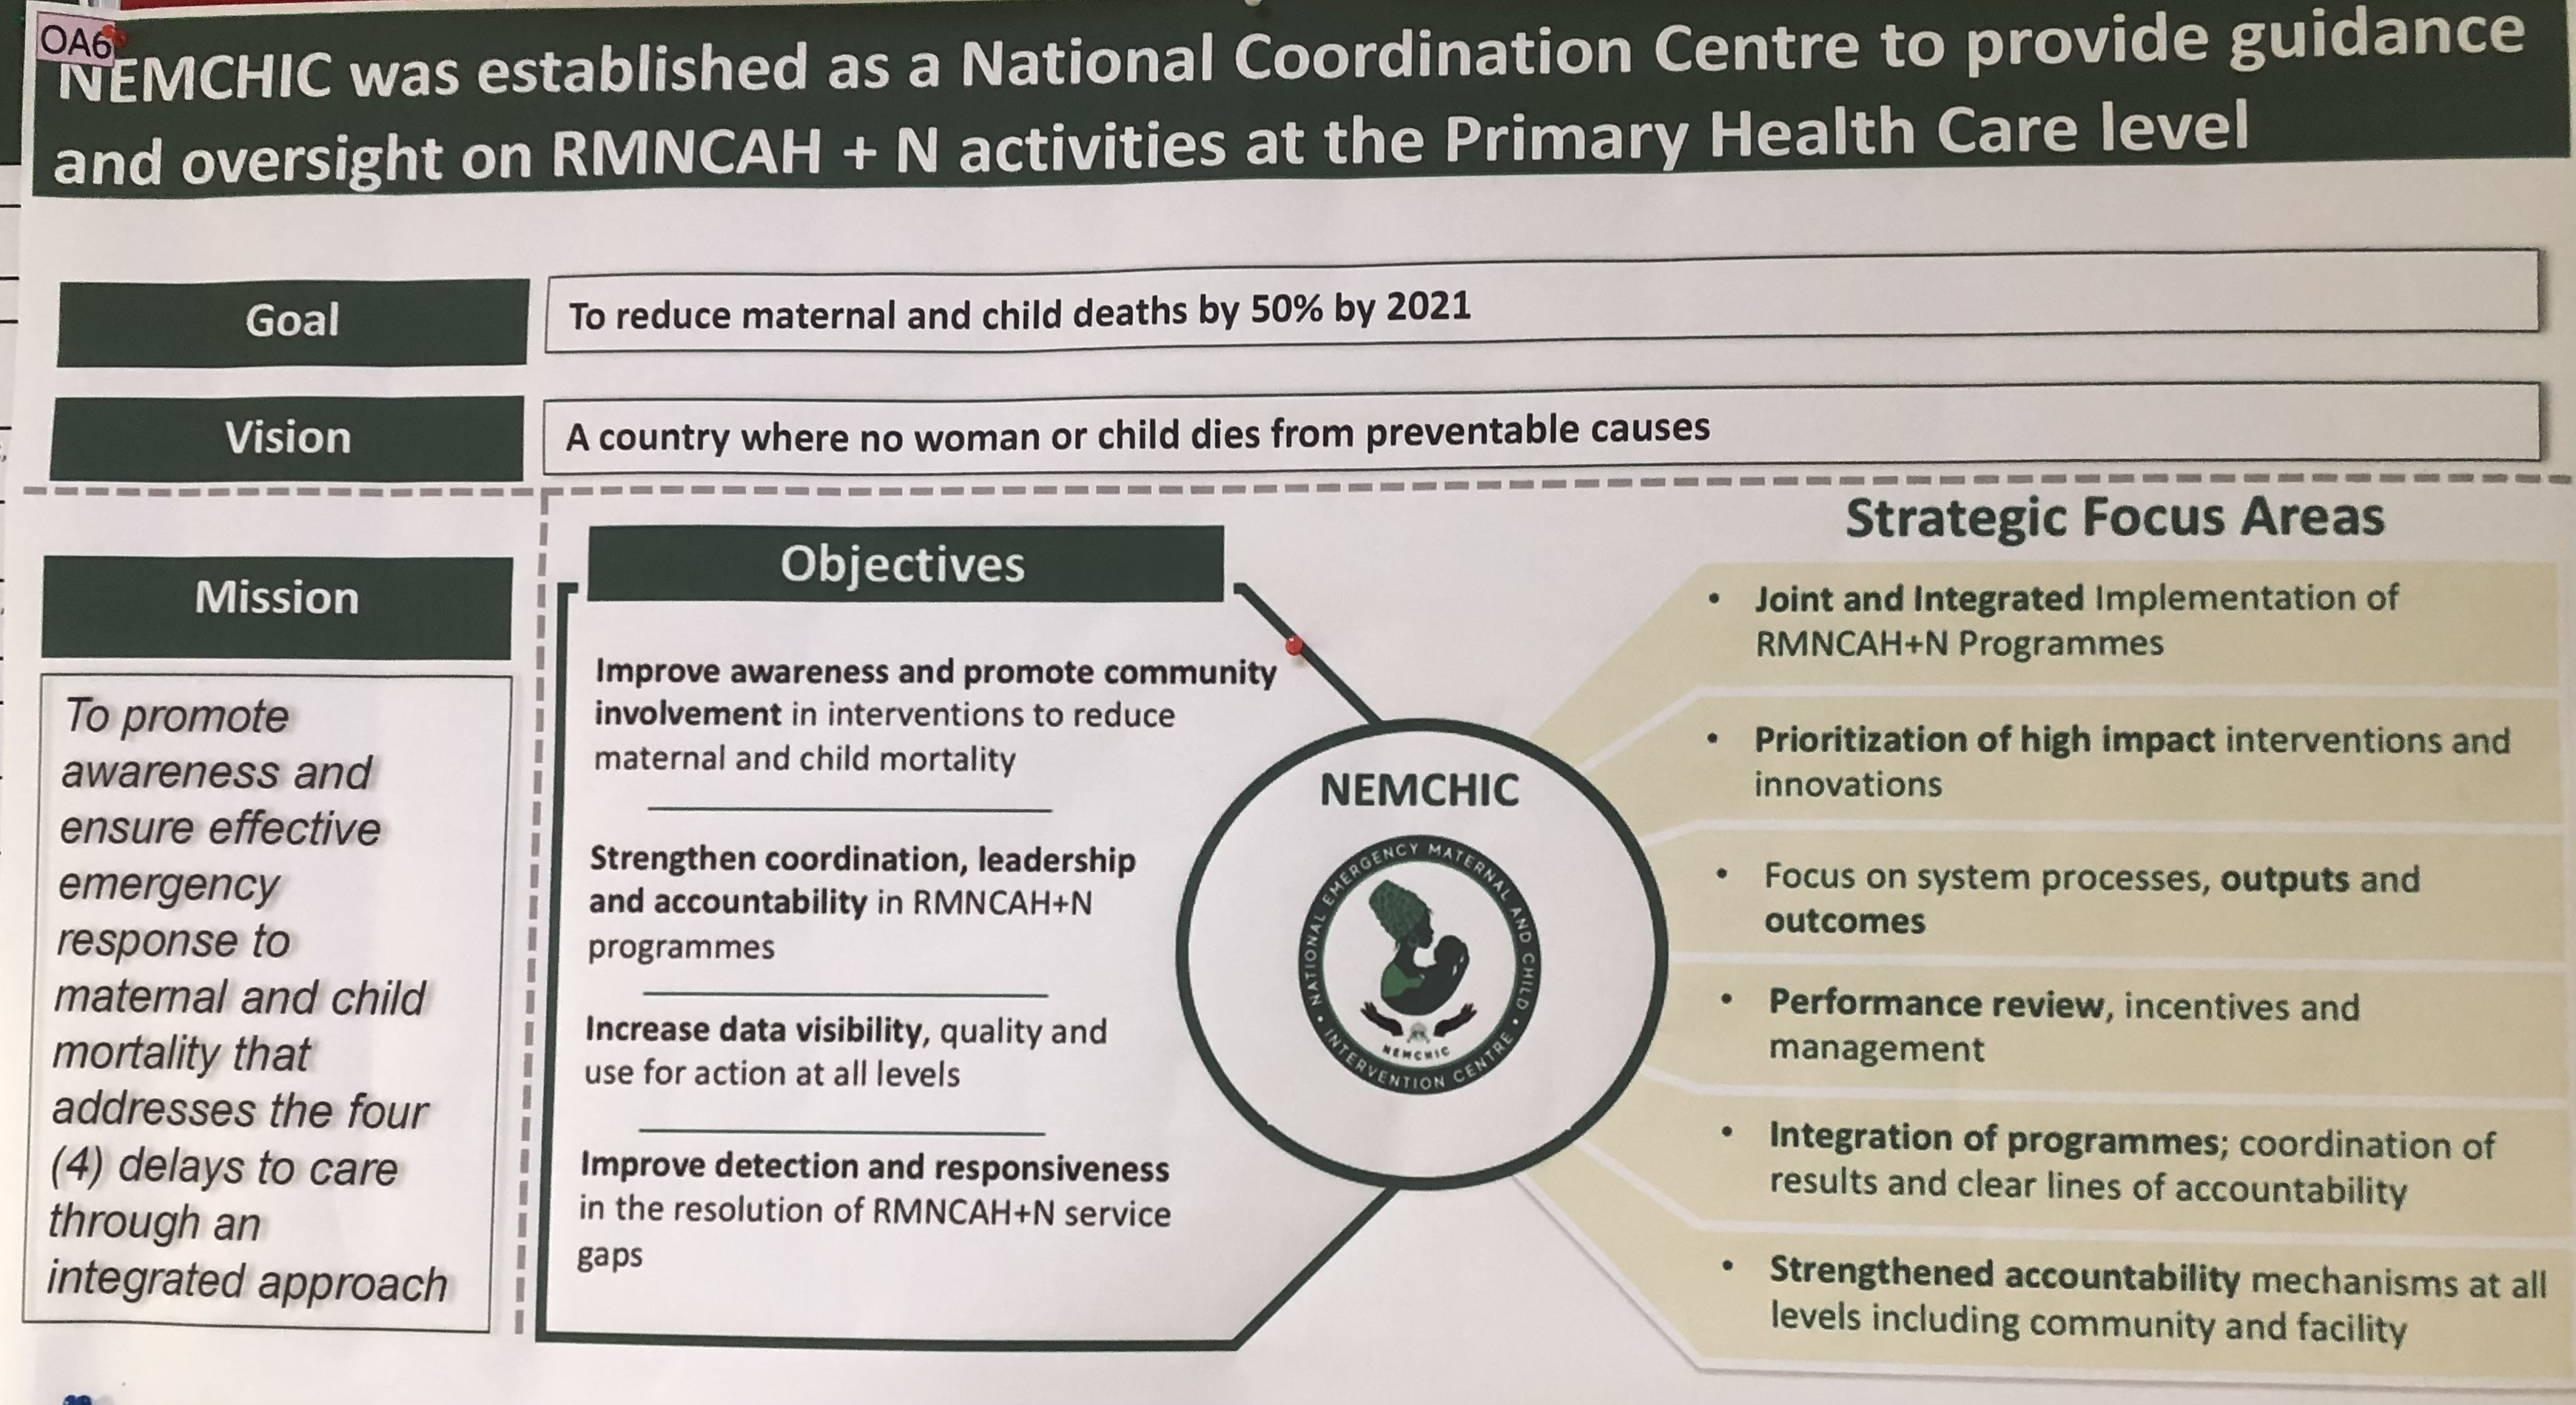 A picture of a document showing the goal, vision, mission, objectives and strategic focus areas of the NEMCHIC programme.